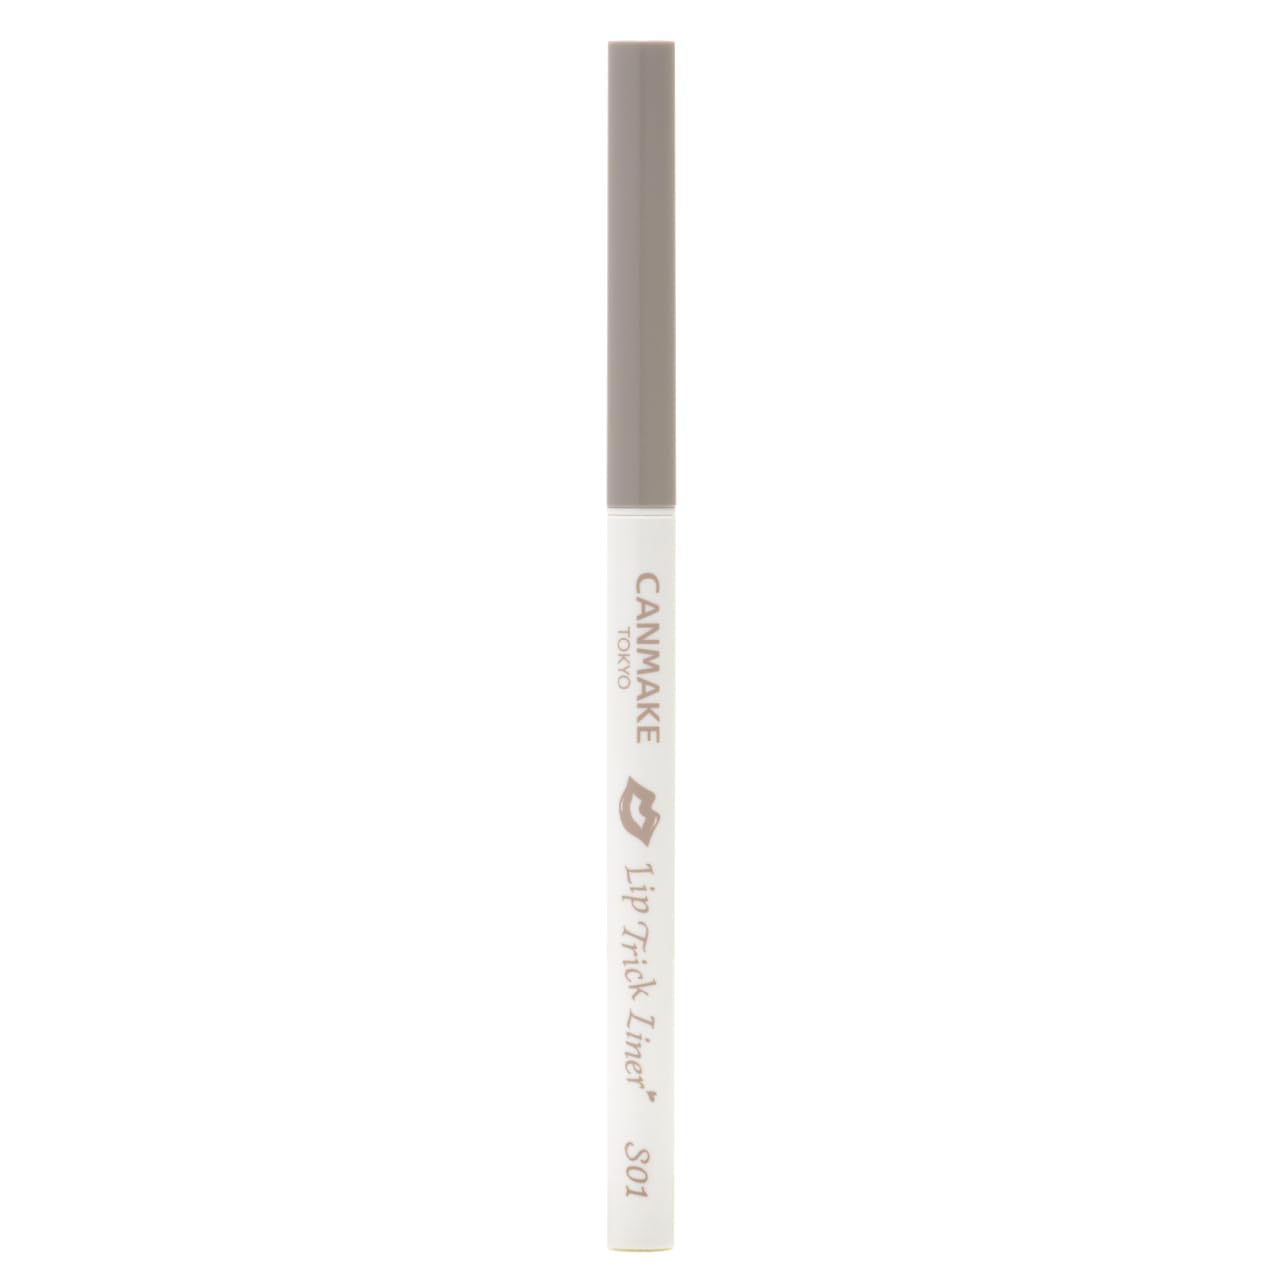 Canmake Lip Trick Liner S01 1.5mm Retractable Shading Lip Pencil in Bruise Gray